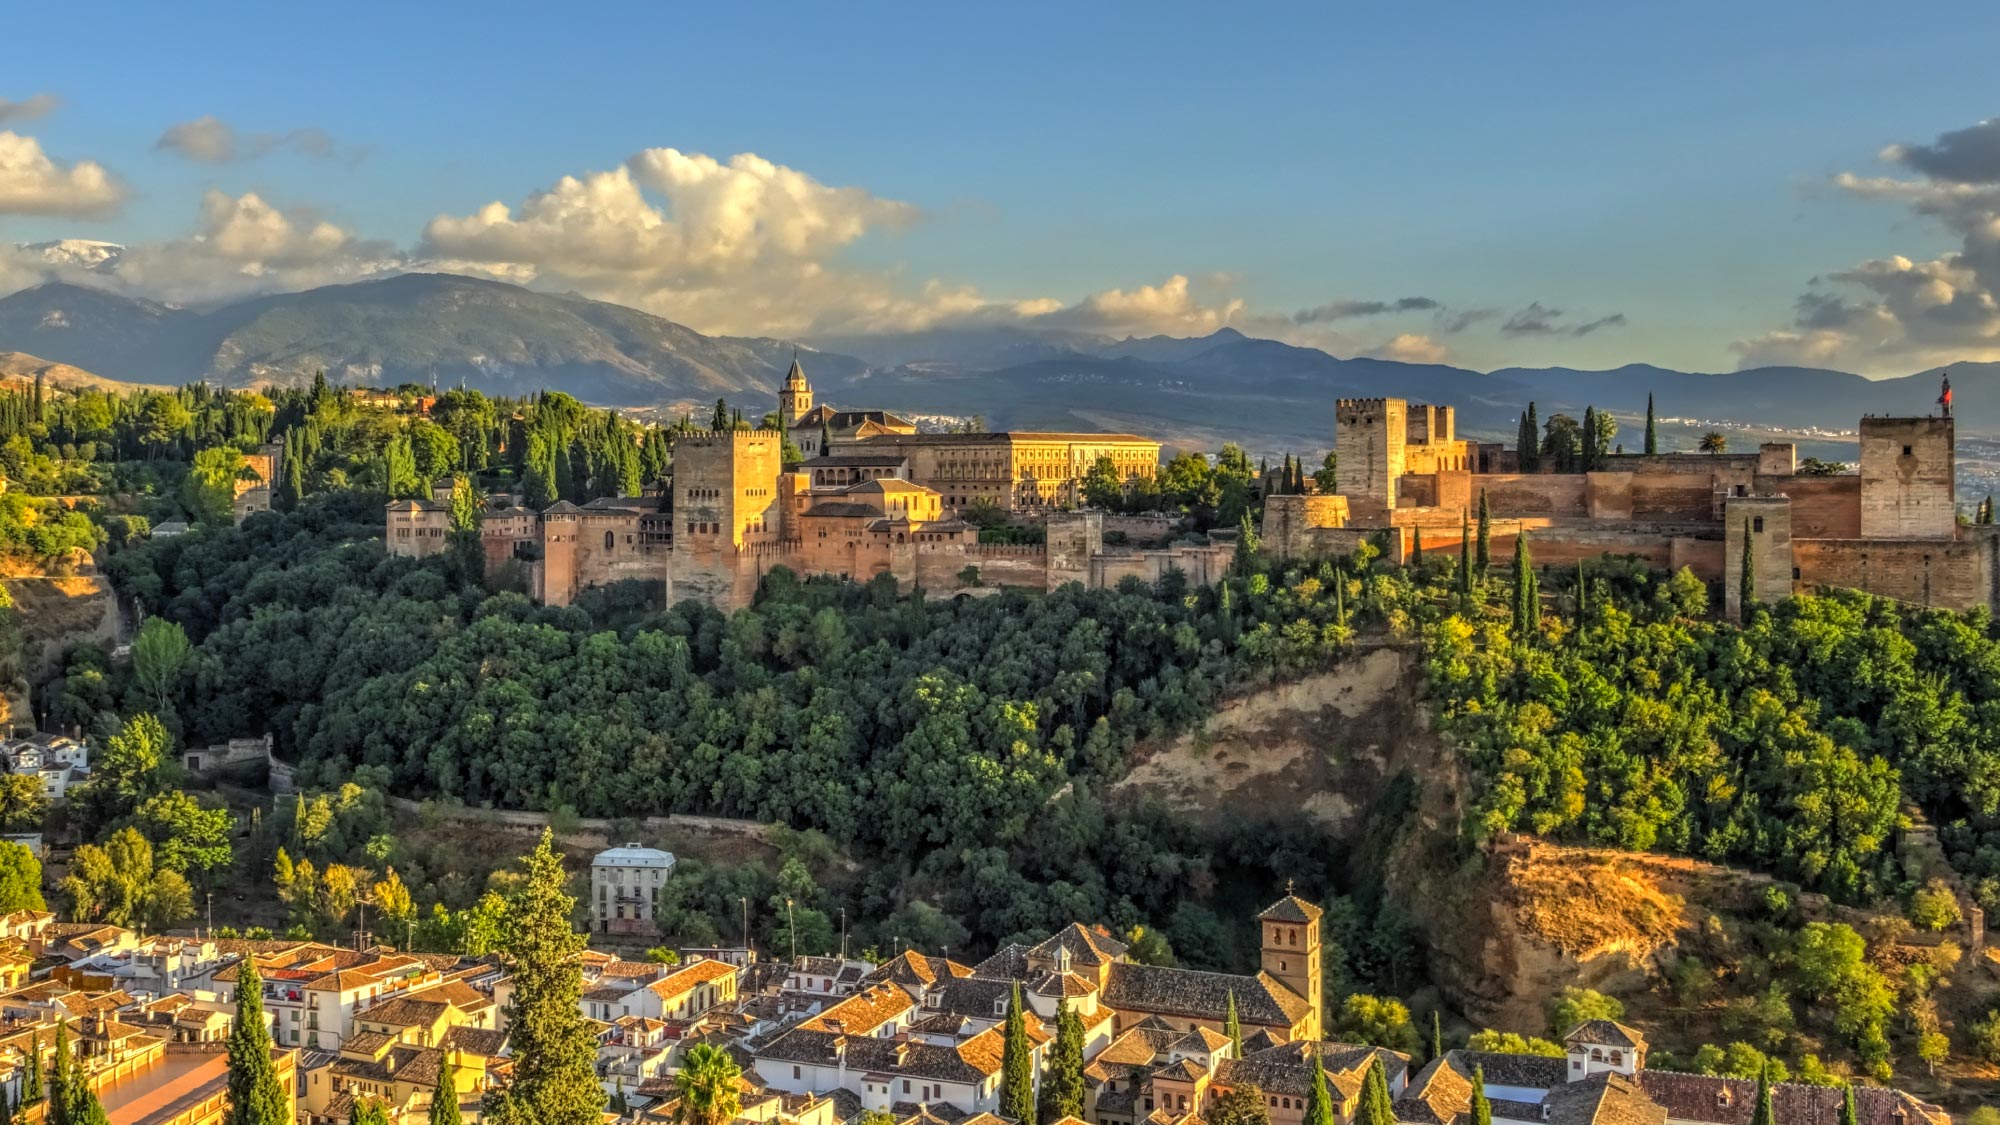 Experience the thrill of flying over Granada's historic skyline, where the iconic Alhambra Palace stands amidst ancient architecture and verdant landscapes. Pilots who own their airplanes can embark on an unforgettable journey, exploring centuries of history from the skies.